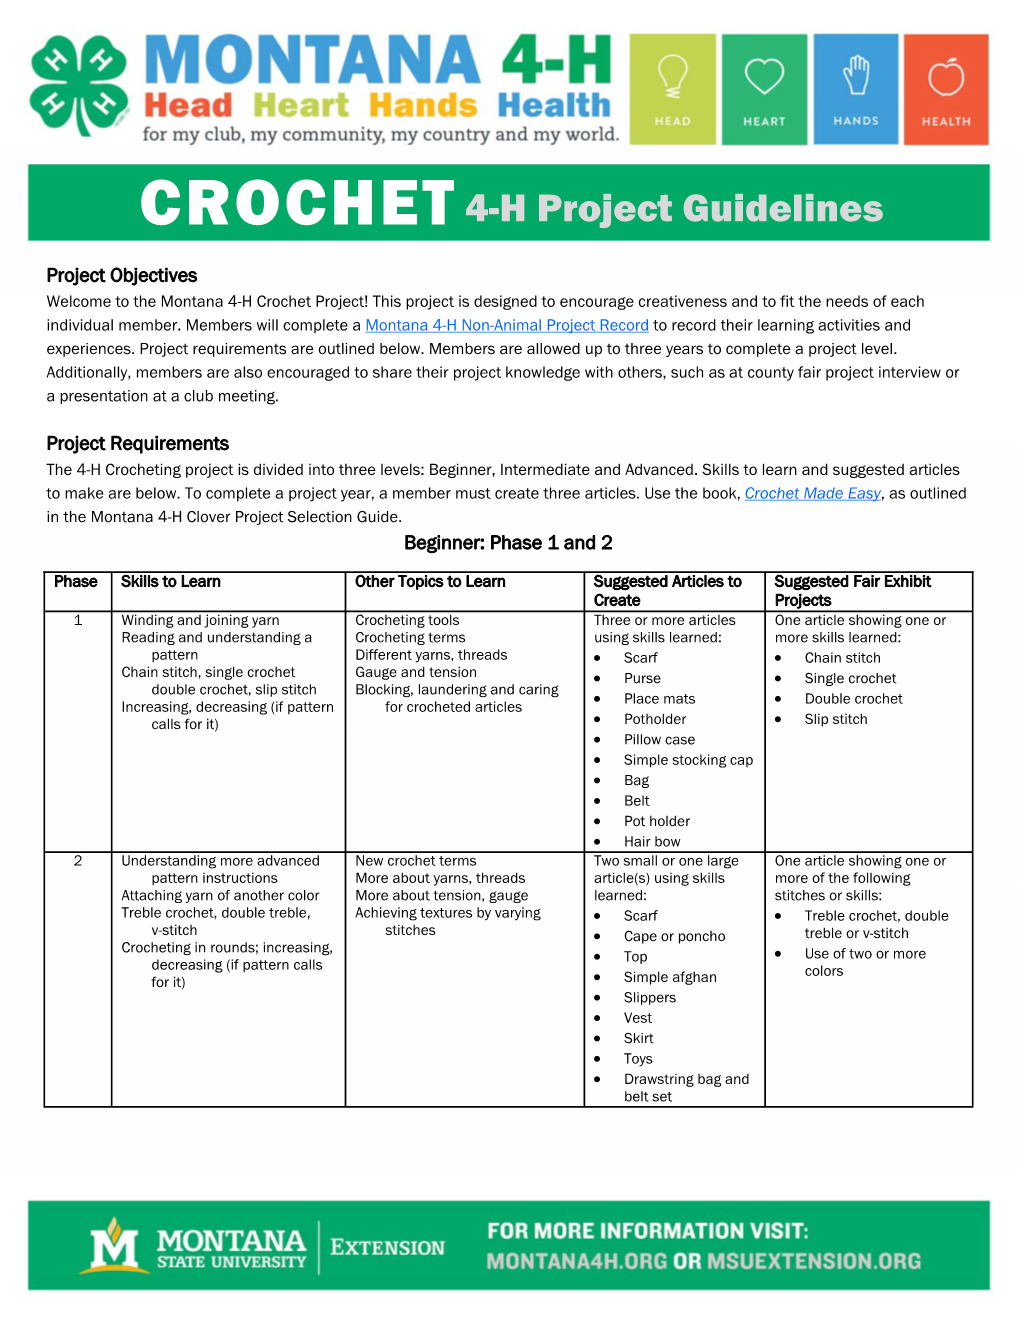 CROCHET 4-H Project Guidelines